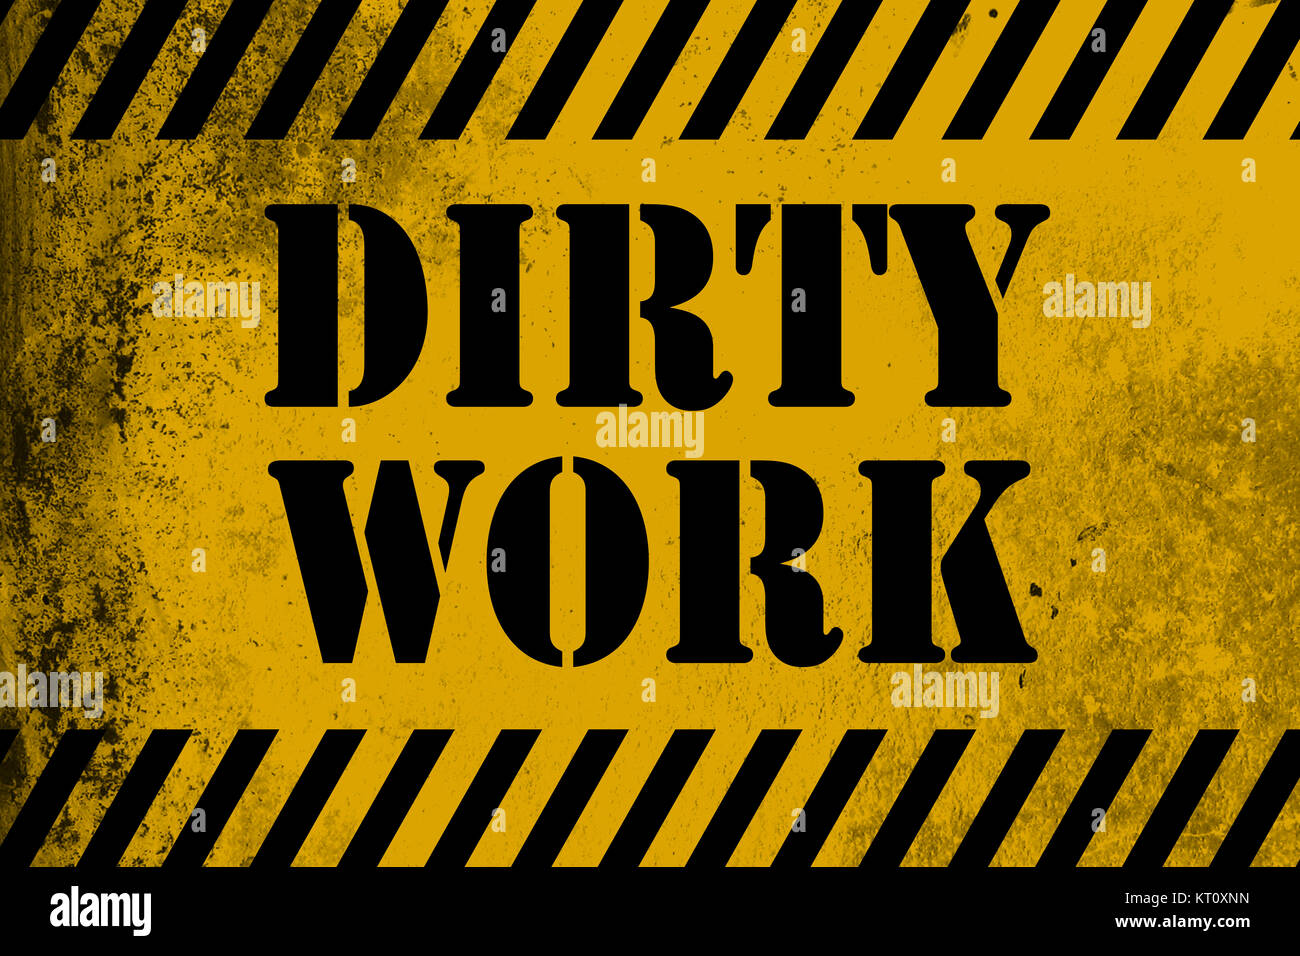 DIrty work sign yellow with stripes Stock Photo